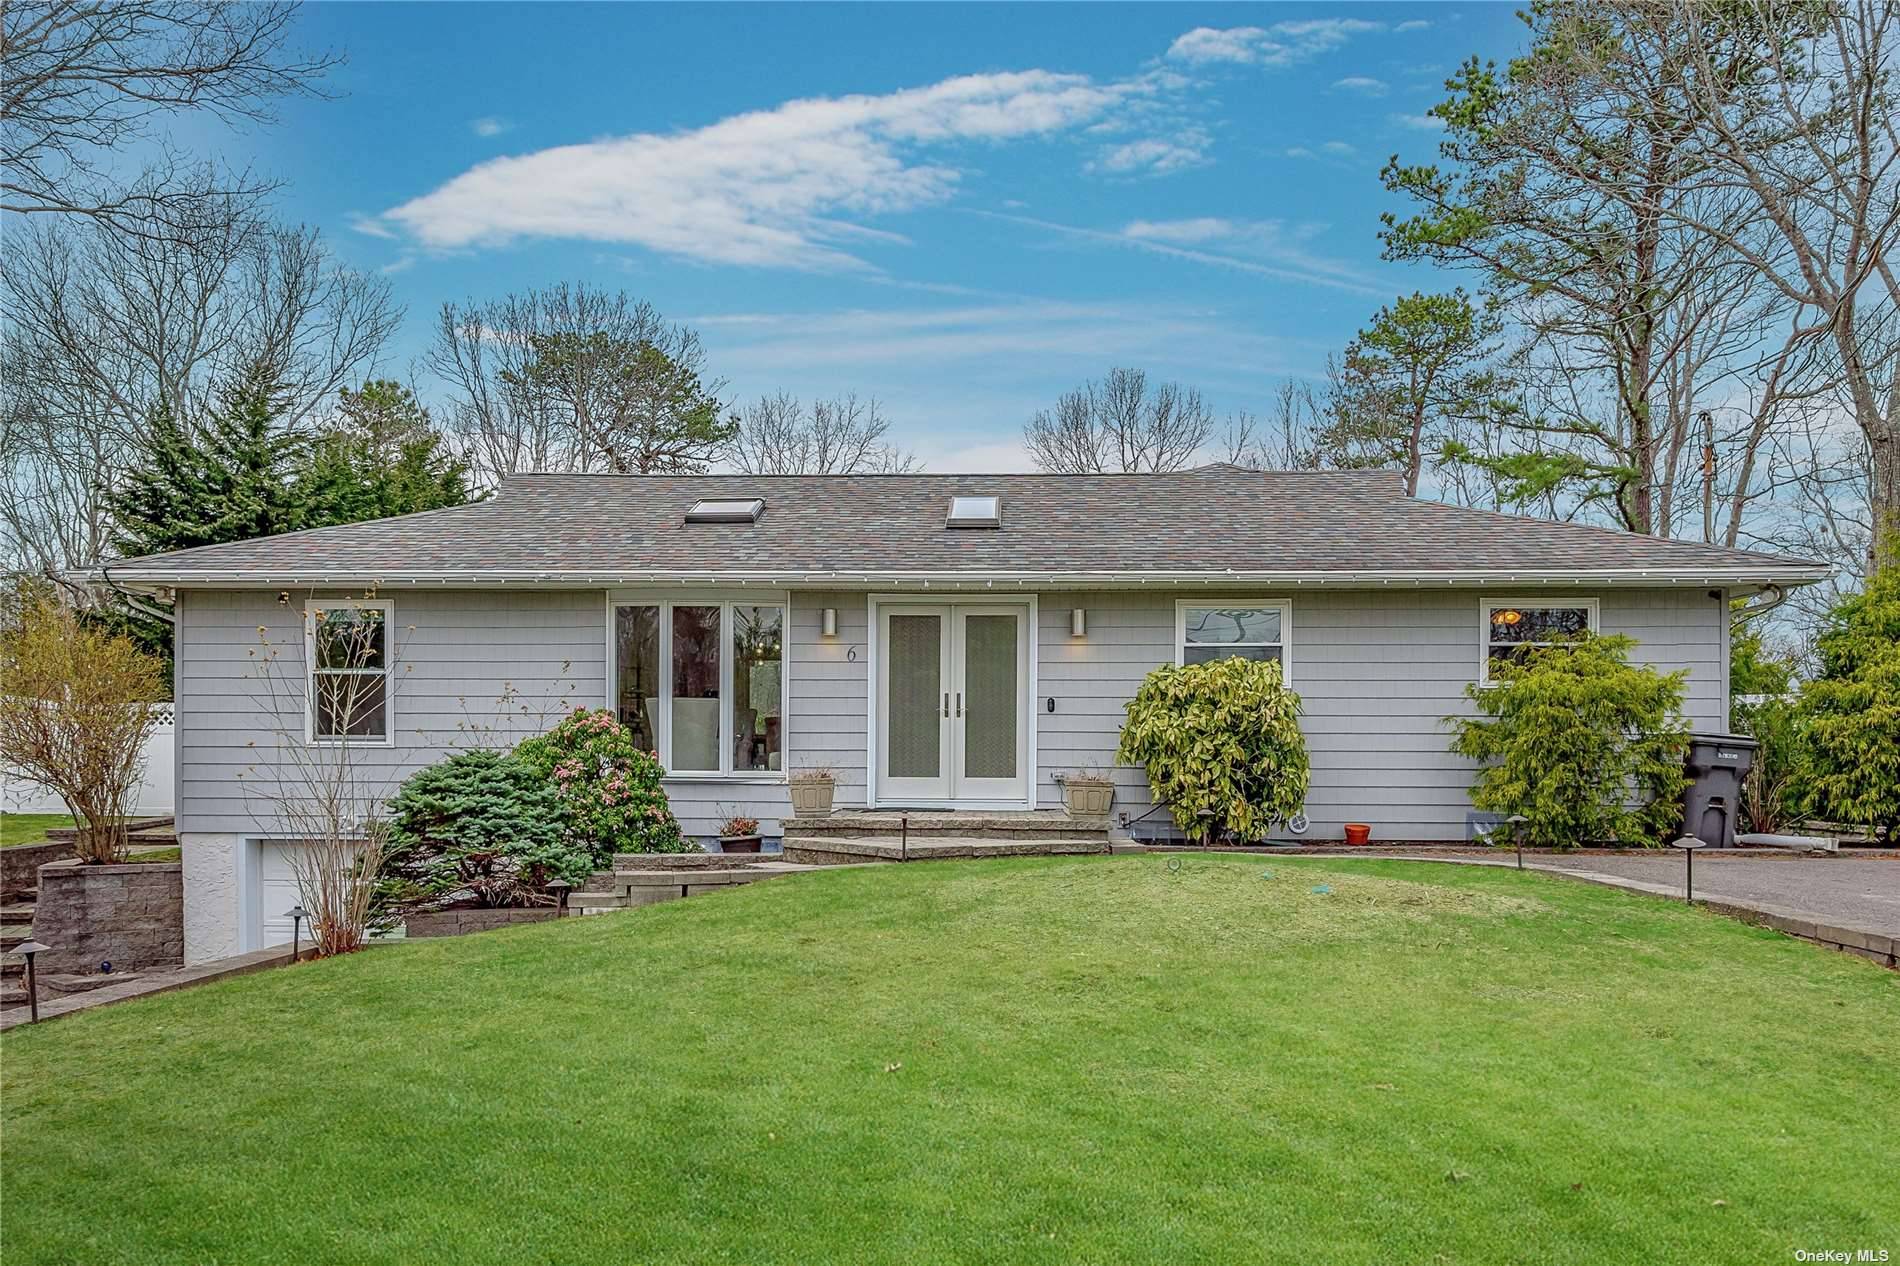 This lovely 4 Bedroom, 3 Full Bath home in East Quogue is newly renovated.